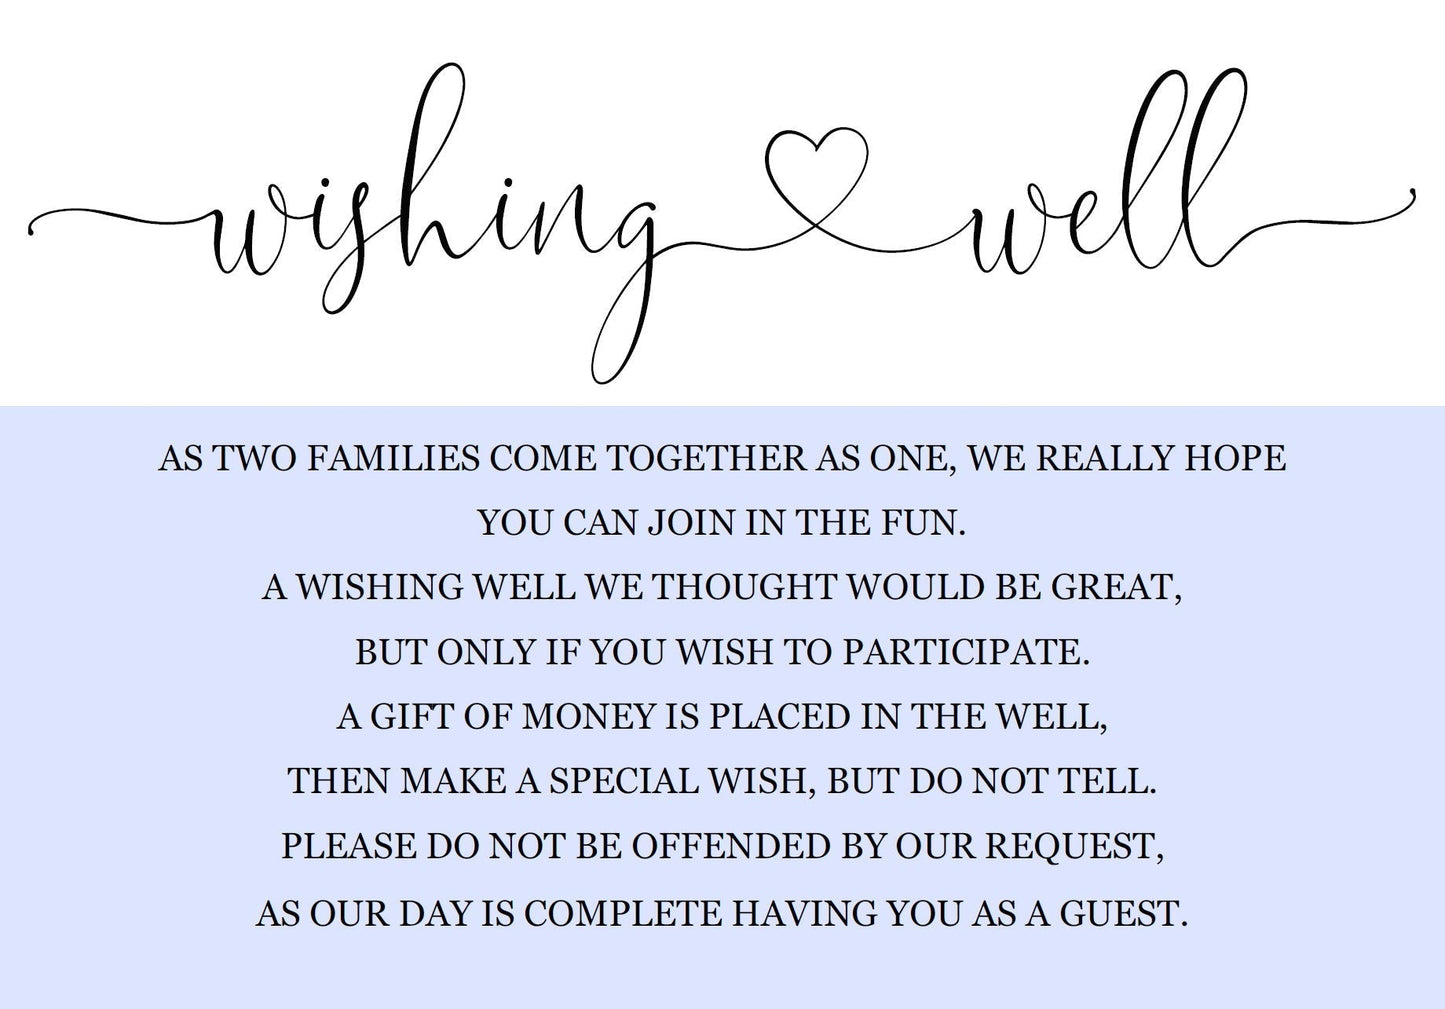 Simple Wedding Wishing Well Card Template,Instant Download, Editable Wishing, Wishing well Cards Insert, Calligraphy,Rustic,Heart  - Heather TAGS | TY | INSERTS SAVVY PAPER CO